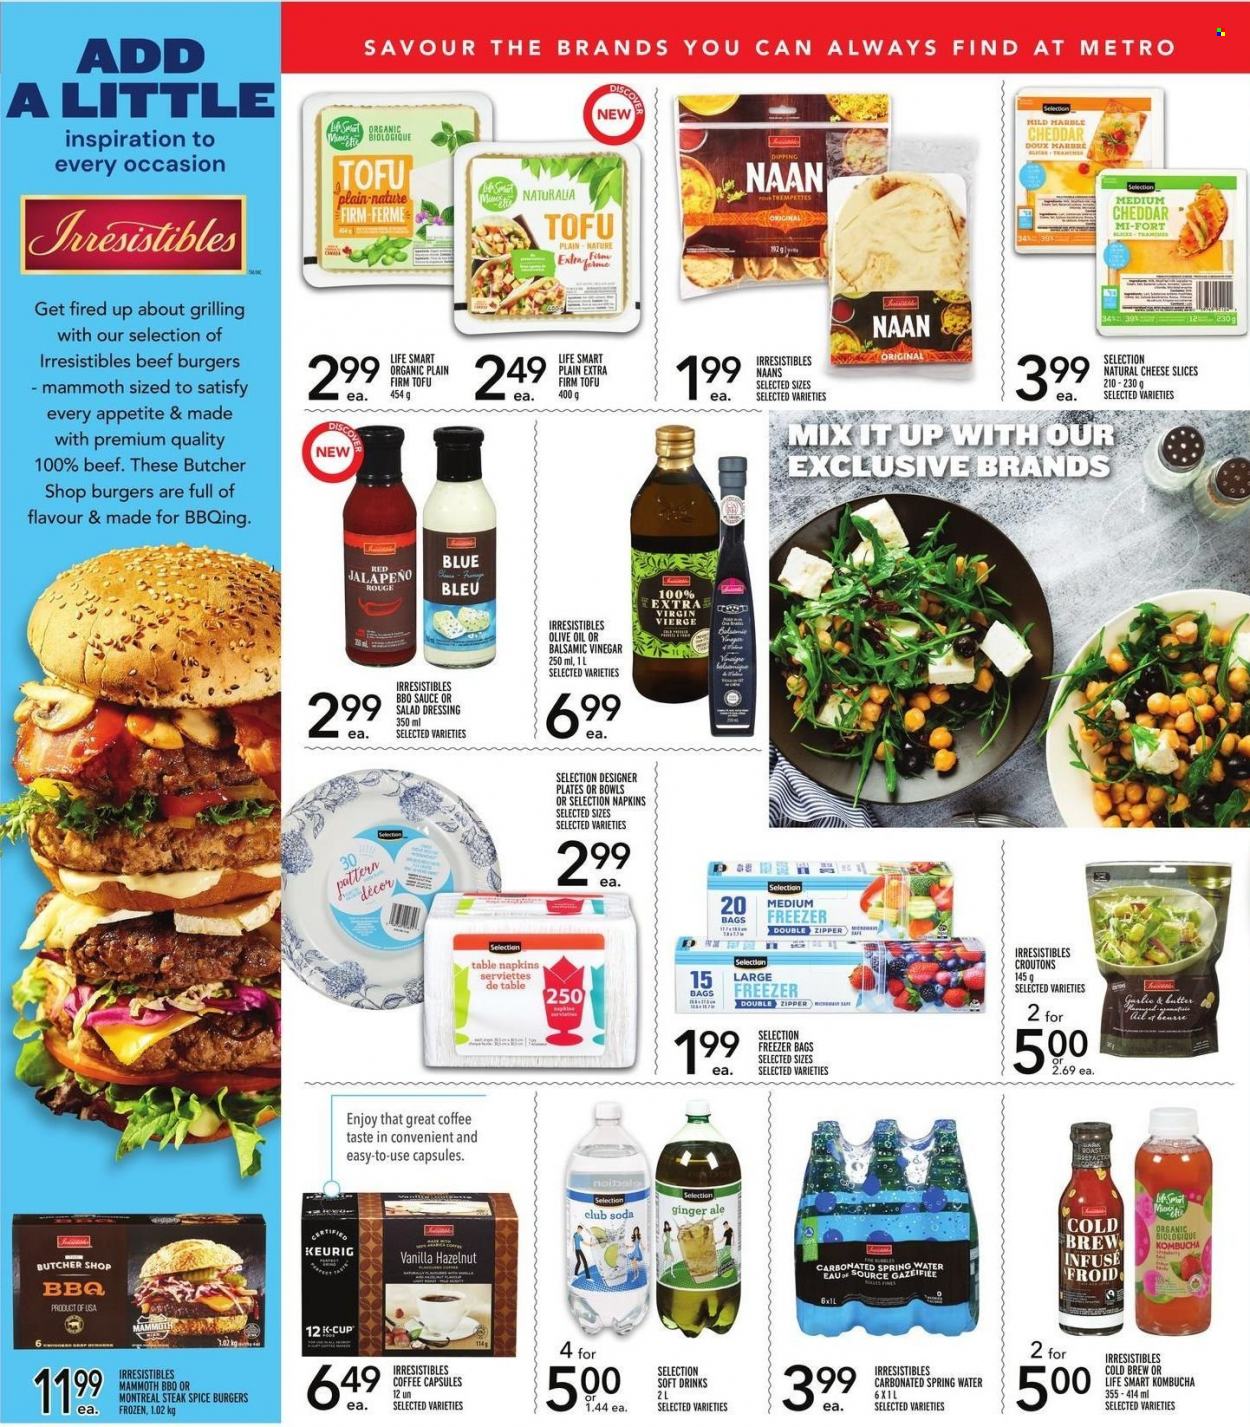 thumbnail - Metro Flyer - May 19, 2022 - June 15, 2022 - Sales products - jalapeño, hamburger, beef burger, sliced cheese, cheddar, tofu, butter, Fita, croutons, spice, BBQ sauce, salad dressing, dressing, balsamic vinegar, extra virgin olive oil, vinegar, olive oil, ginger ale, soft drink, Club Soda, spring water, kombucha, coffee, coffee capsules, K-Cups, Keurig, napkins, bag, plate, freezer bag, steak. Page 3.